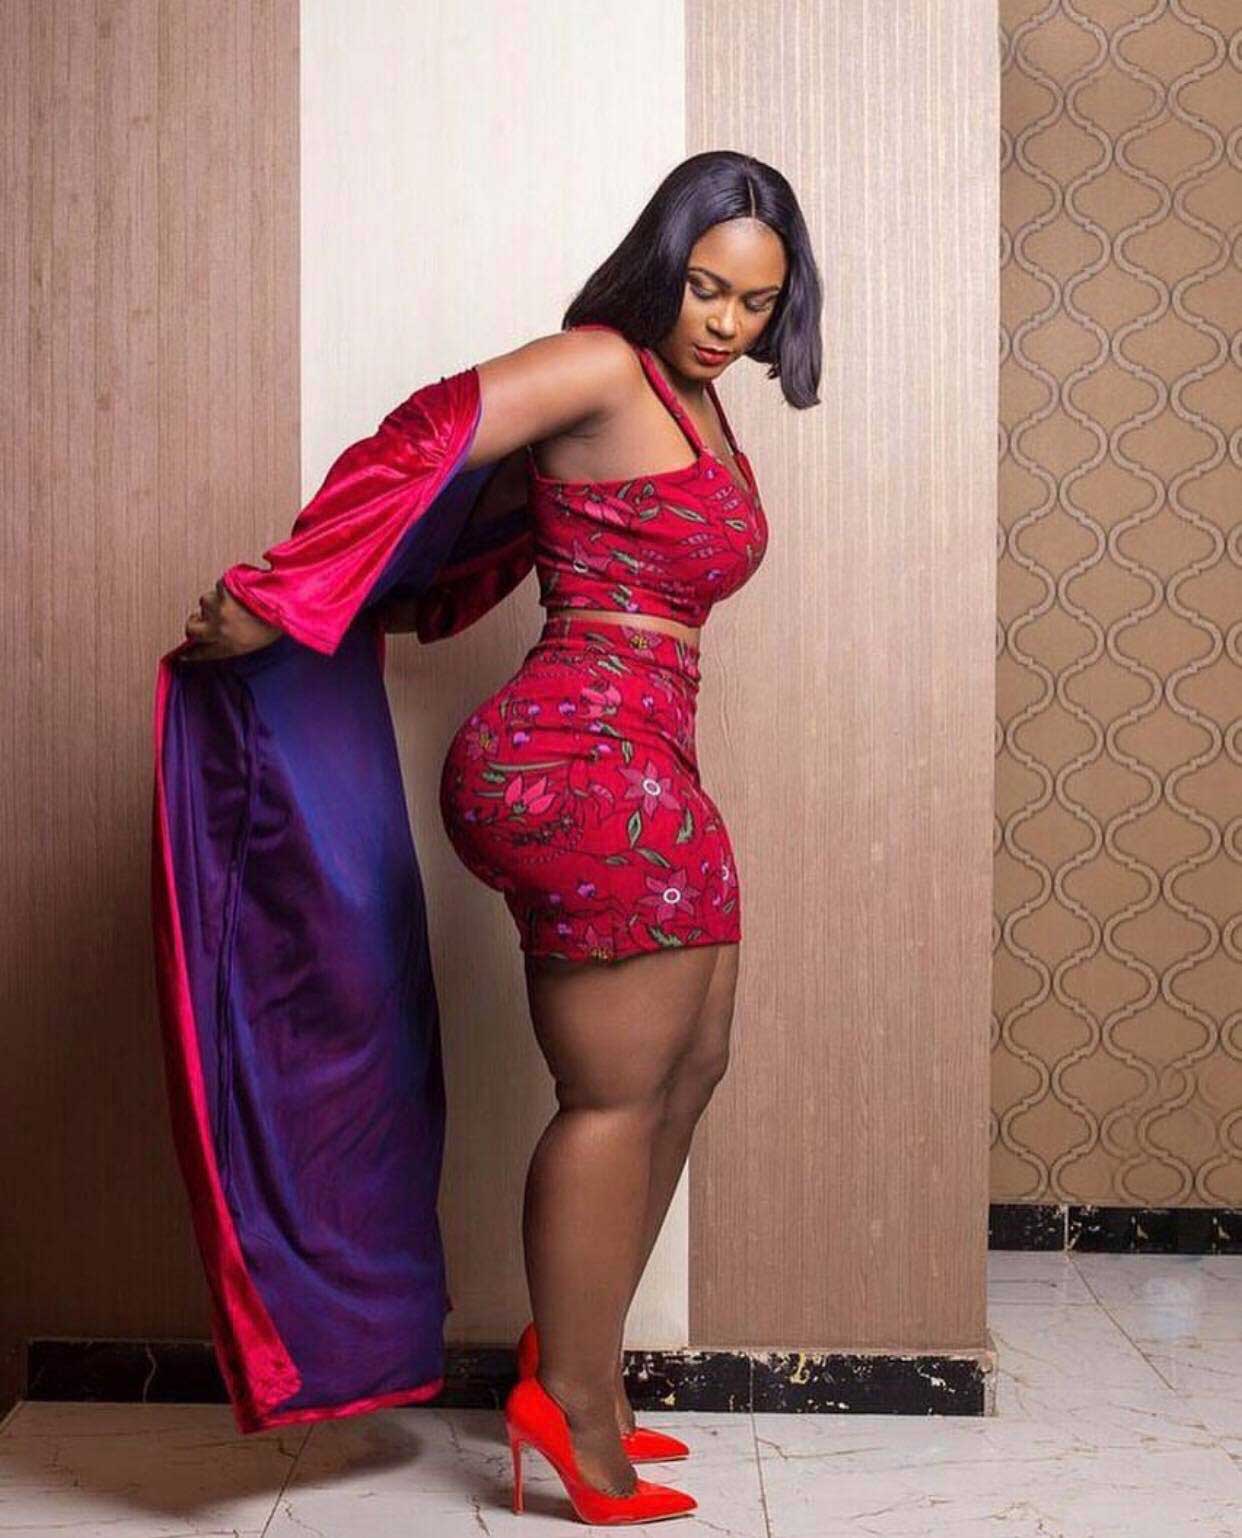 Abidivabroni, the curvaceous Ghanaian mother of 4